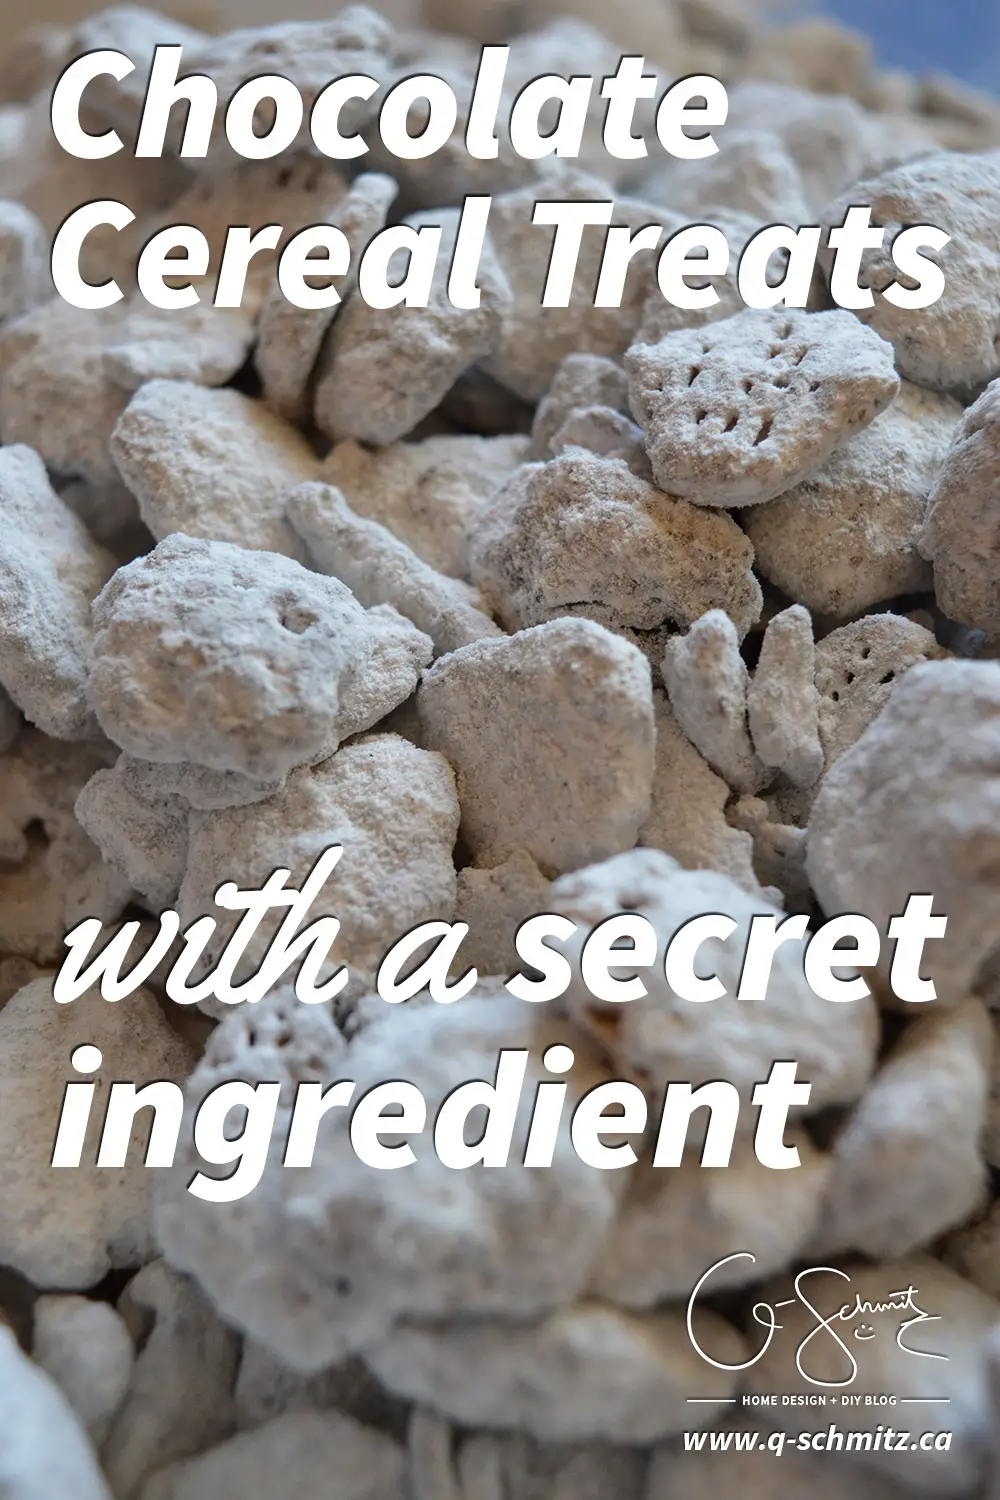 Have you made dessert dog treats before (aka Crispix chocolate cereal treats?).  Bet you’ve never had them with this secret ingredient before!  Check out my simple recipe with less than 5 ingredients for a yummy, finger licking variation of these easy desserts!  (And they’re peanut-butter free too)